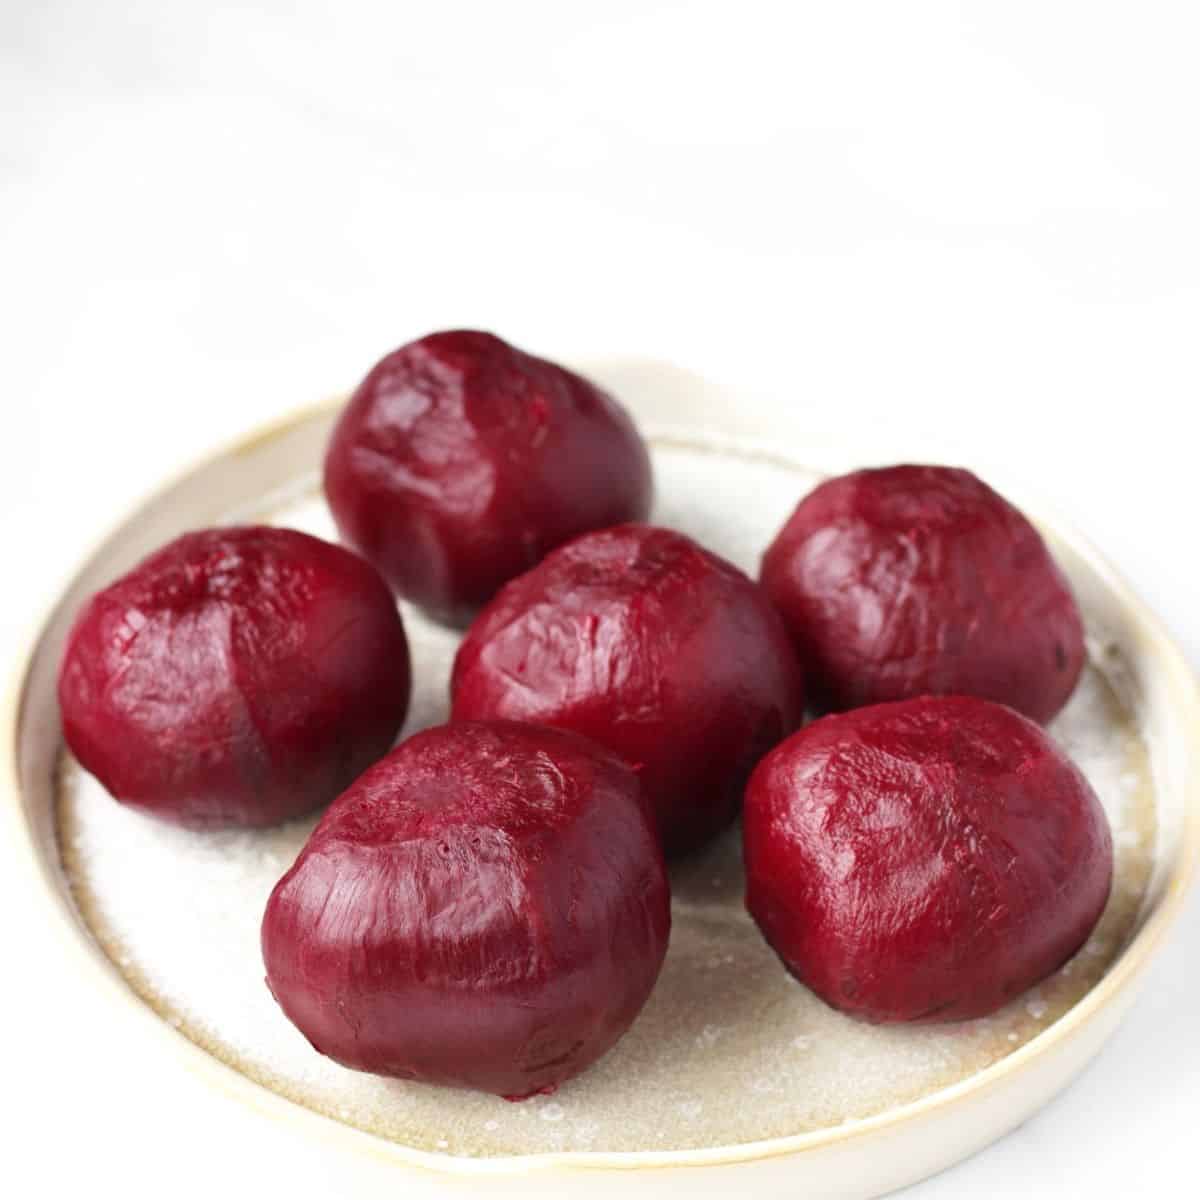 shiny, peeled, whole cooked beets on a beige plate